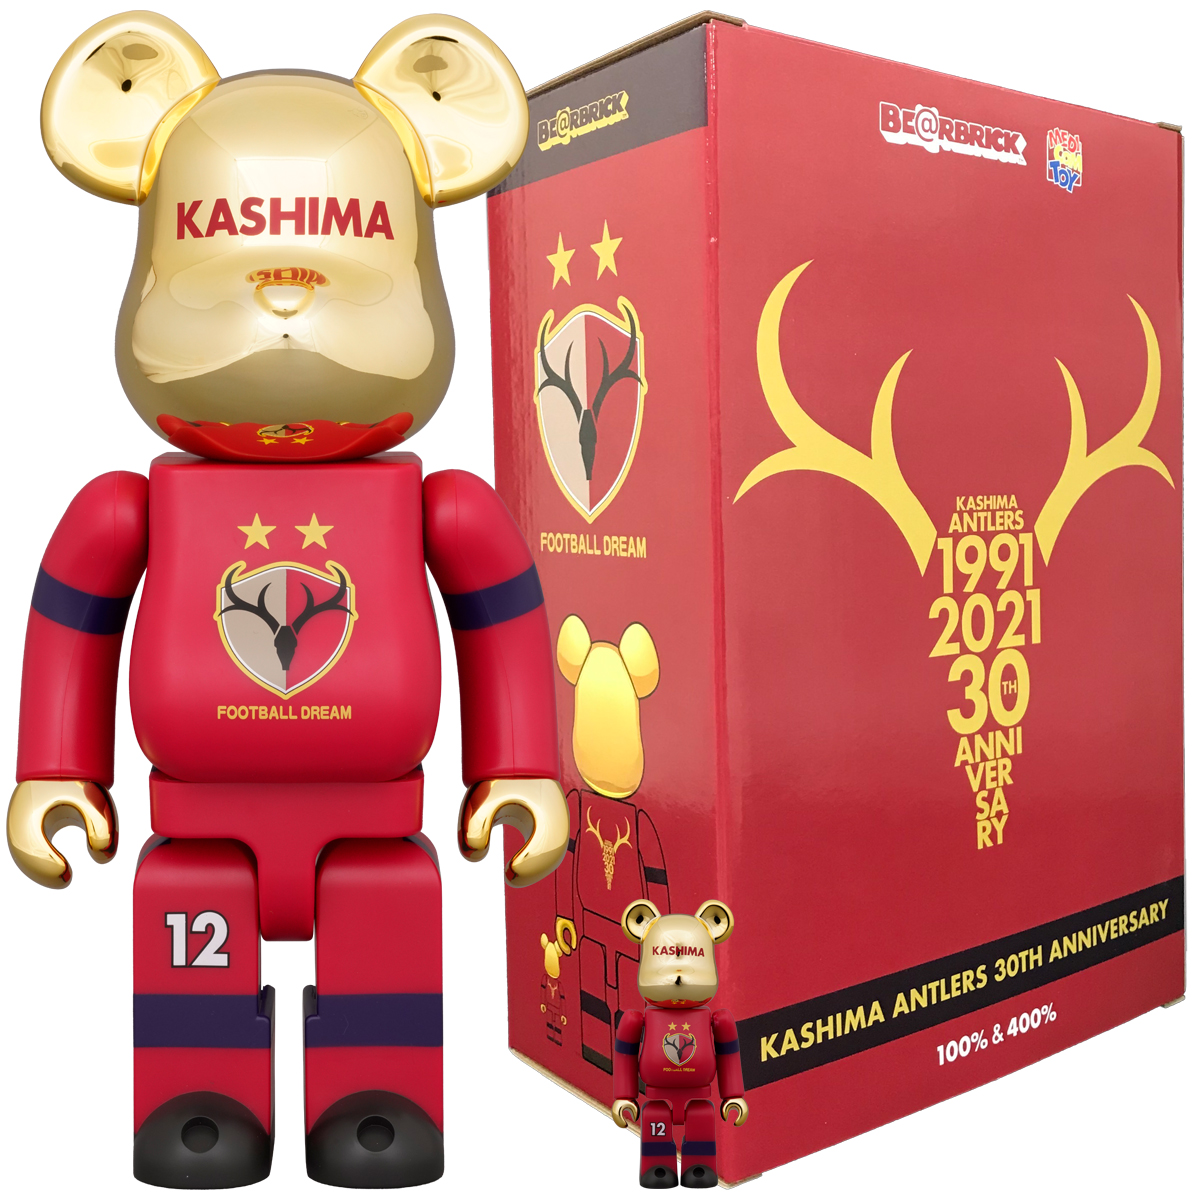 BE＠RBRICK KASHIMA ANTLERS 30th ANNIVERSARY 100%&400% | グッズ ...